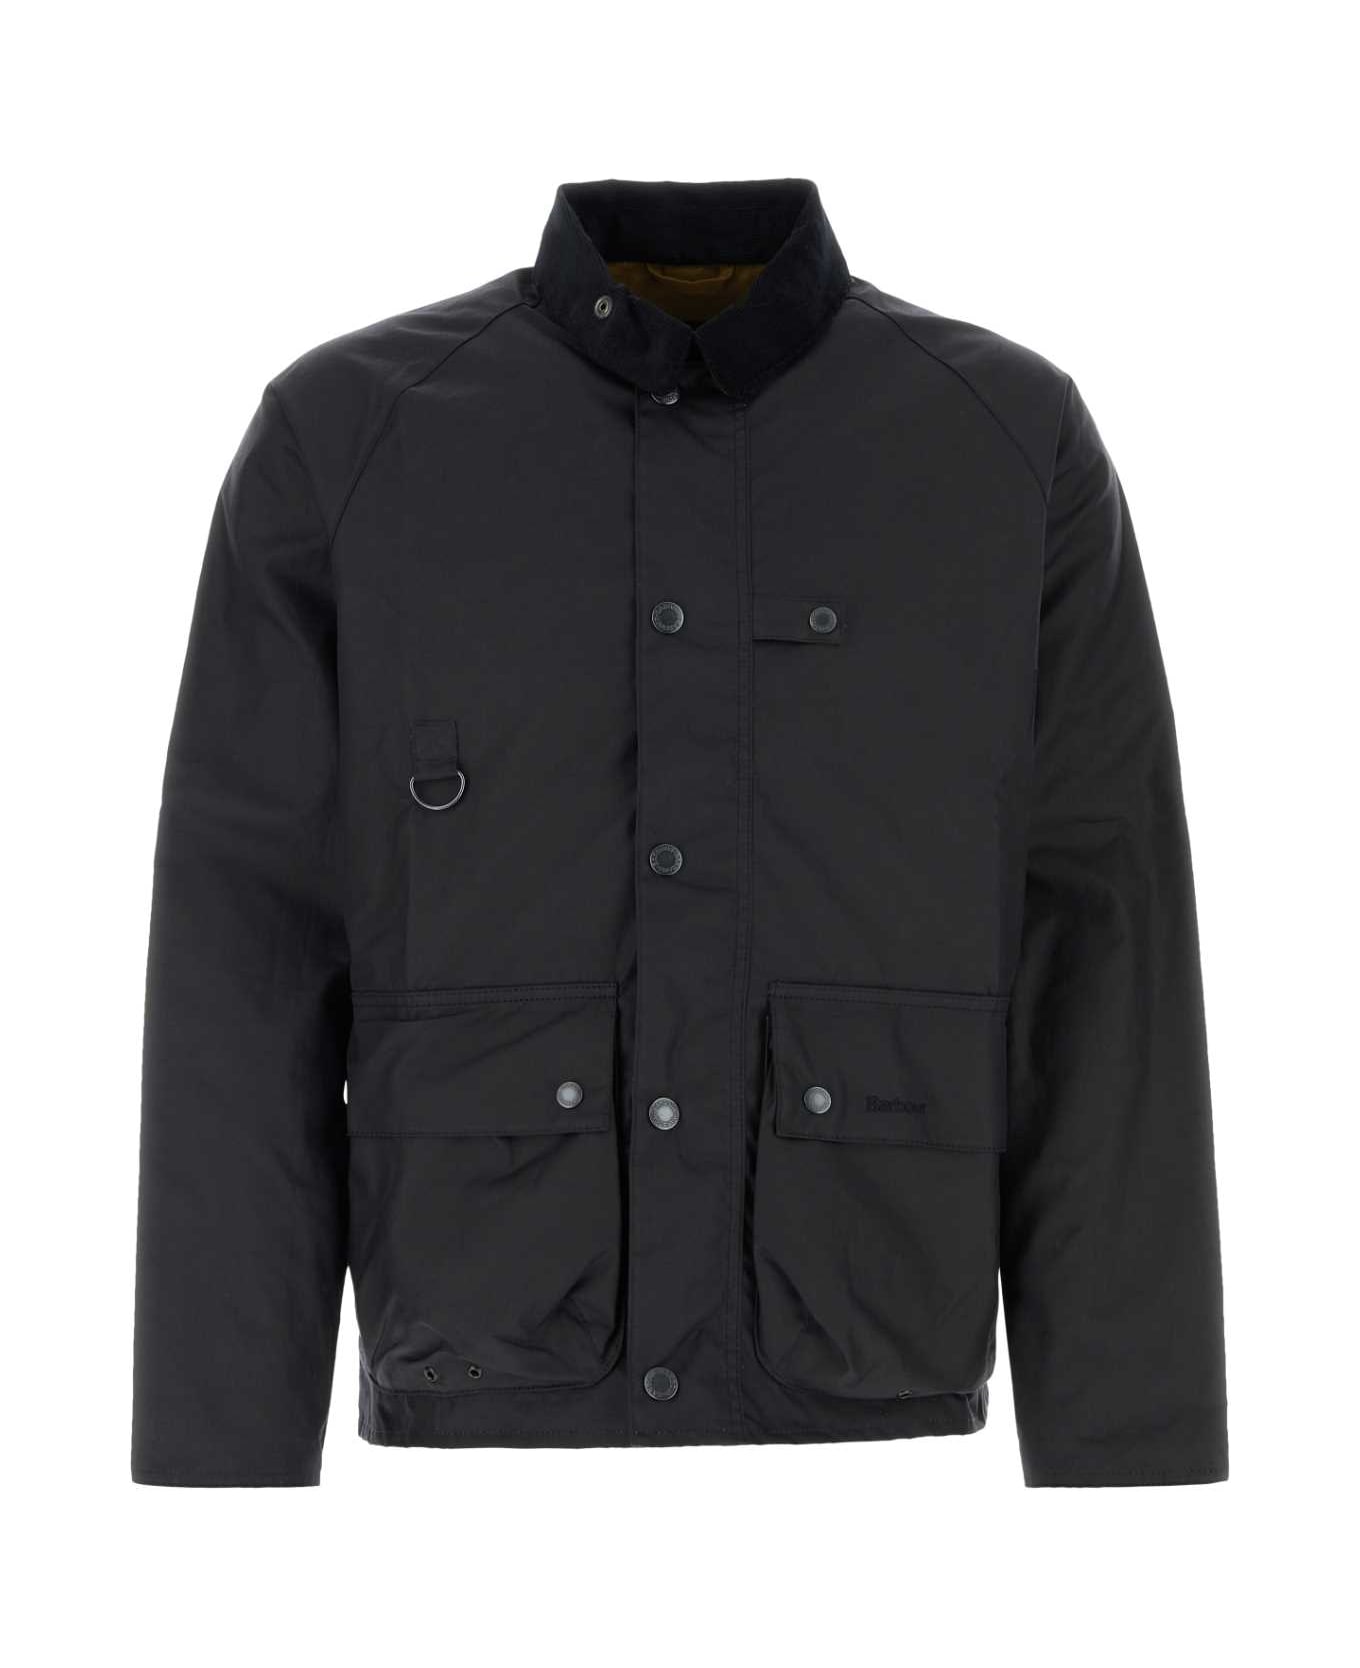 Barbour Black Cotton Utily Spey Jacket - NAVY